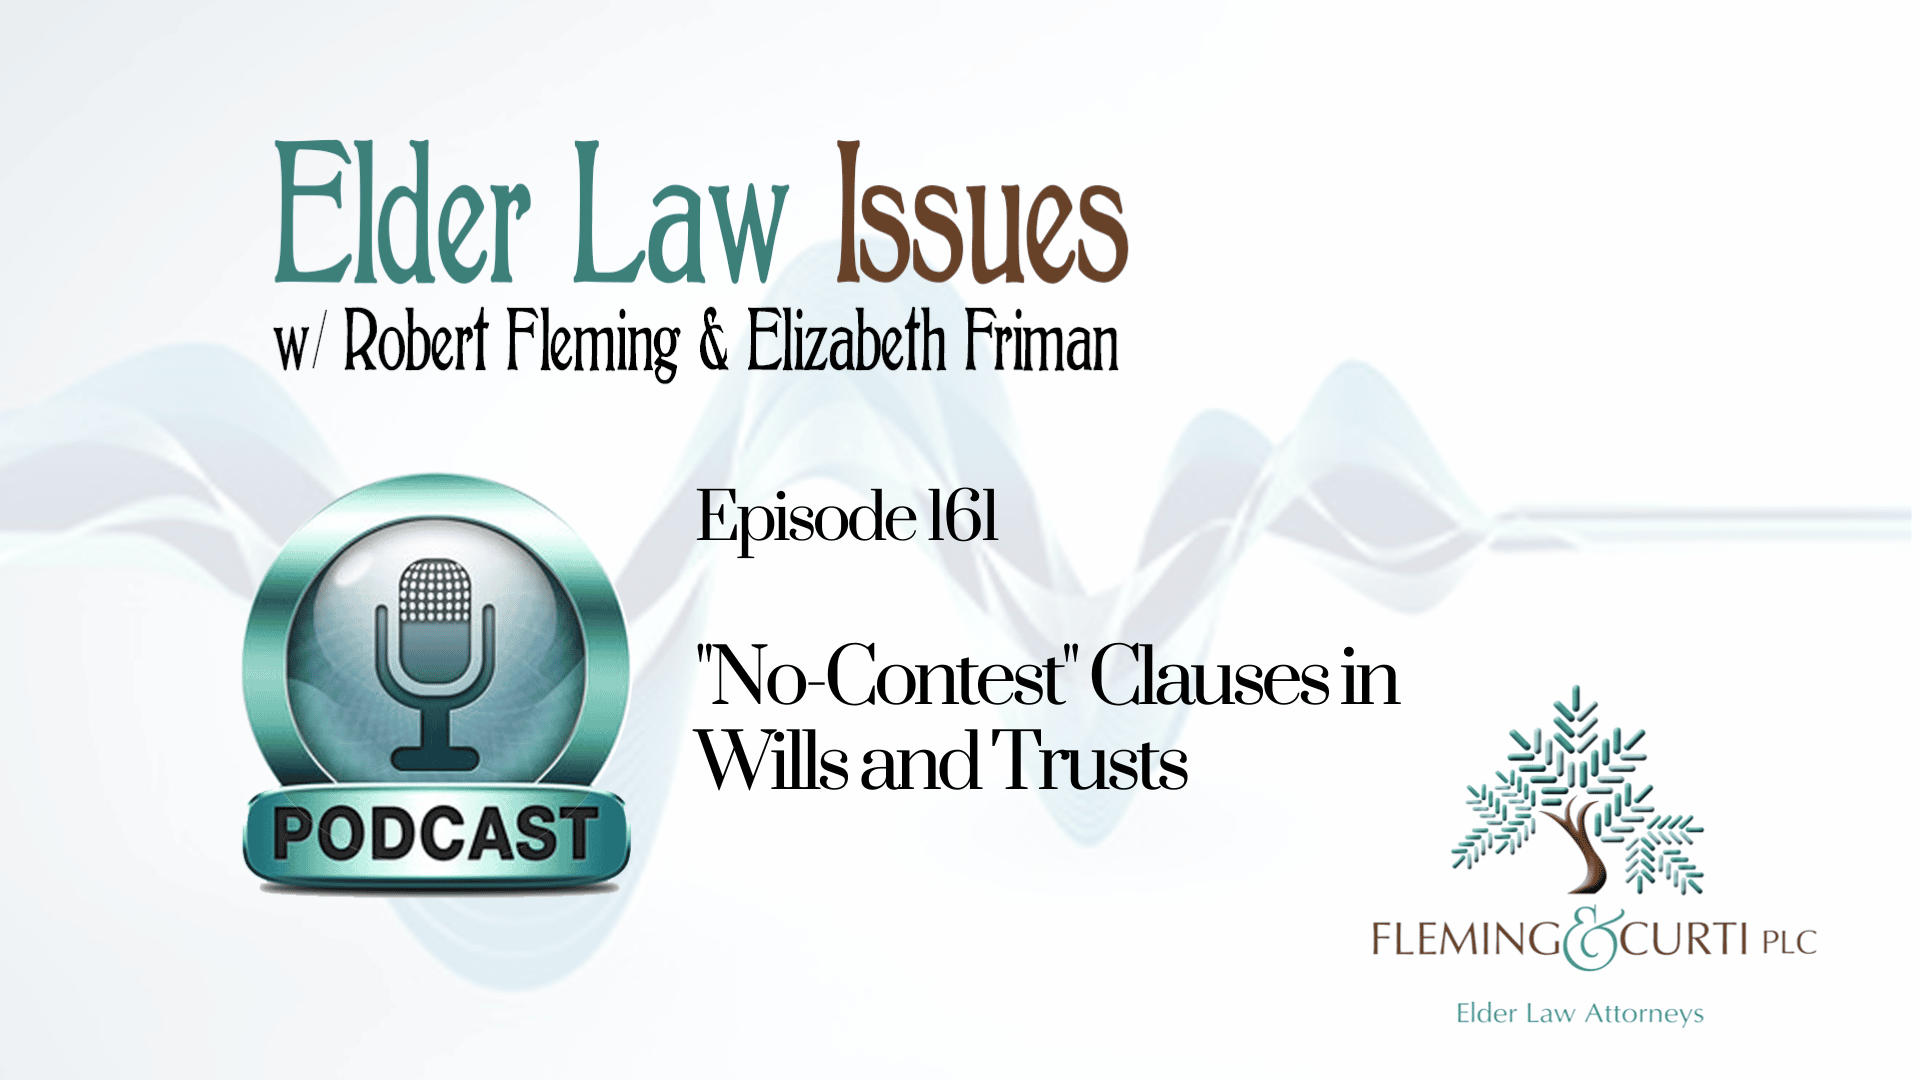 No-Contest Clauses in Wills and Trusts